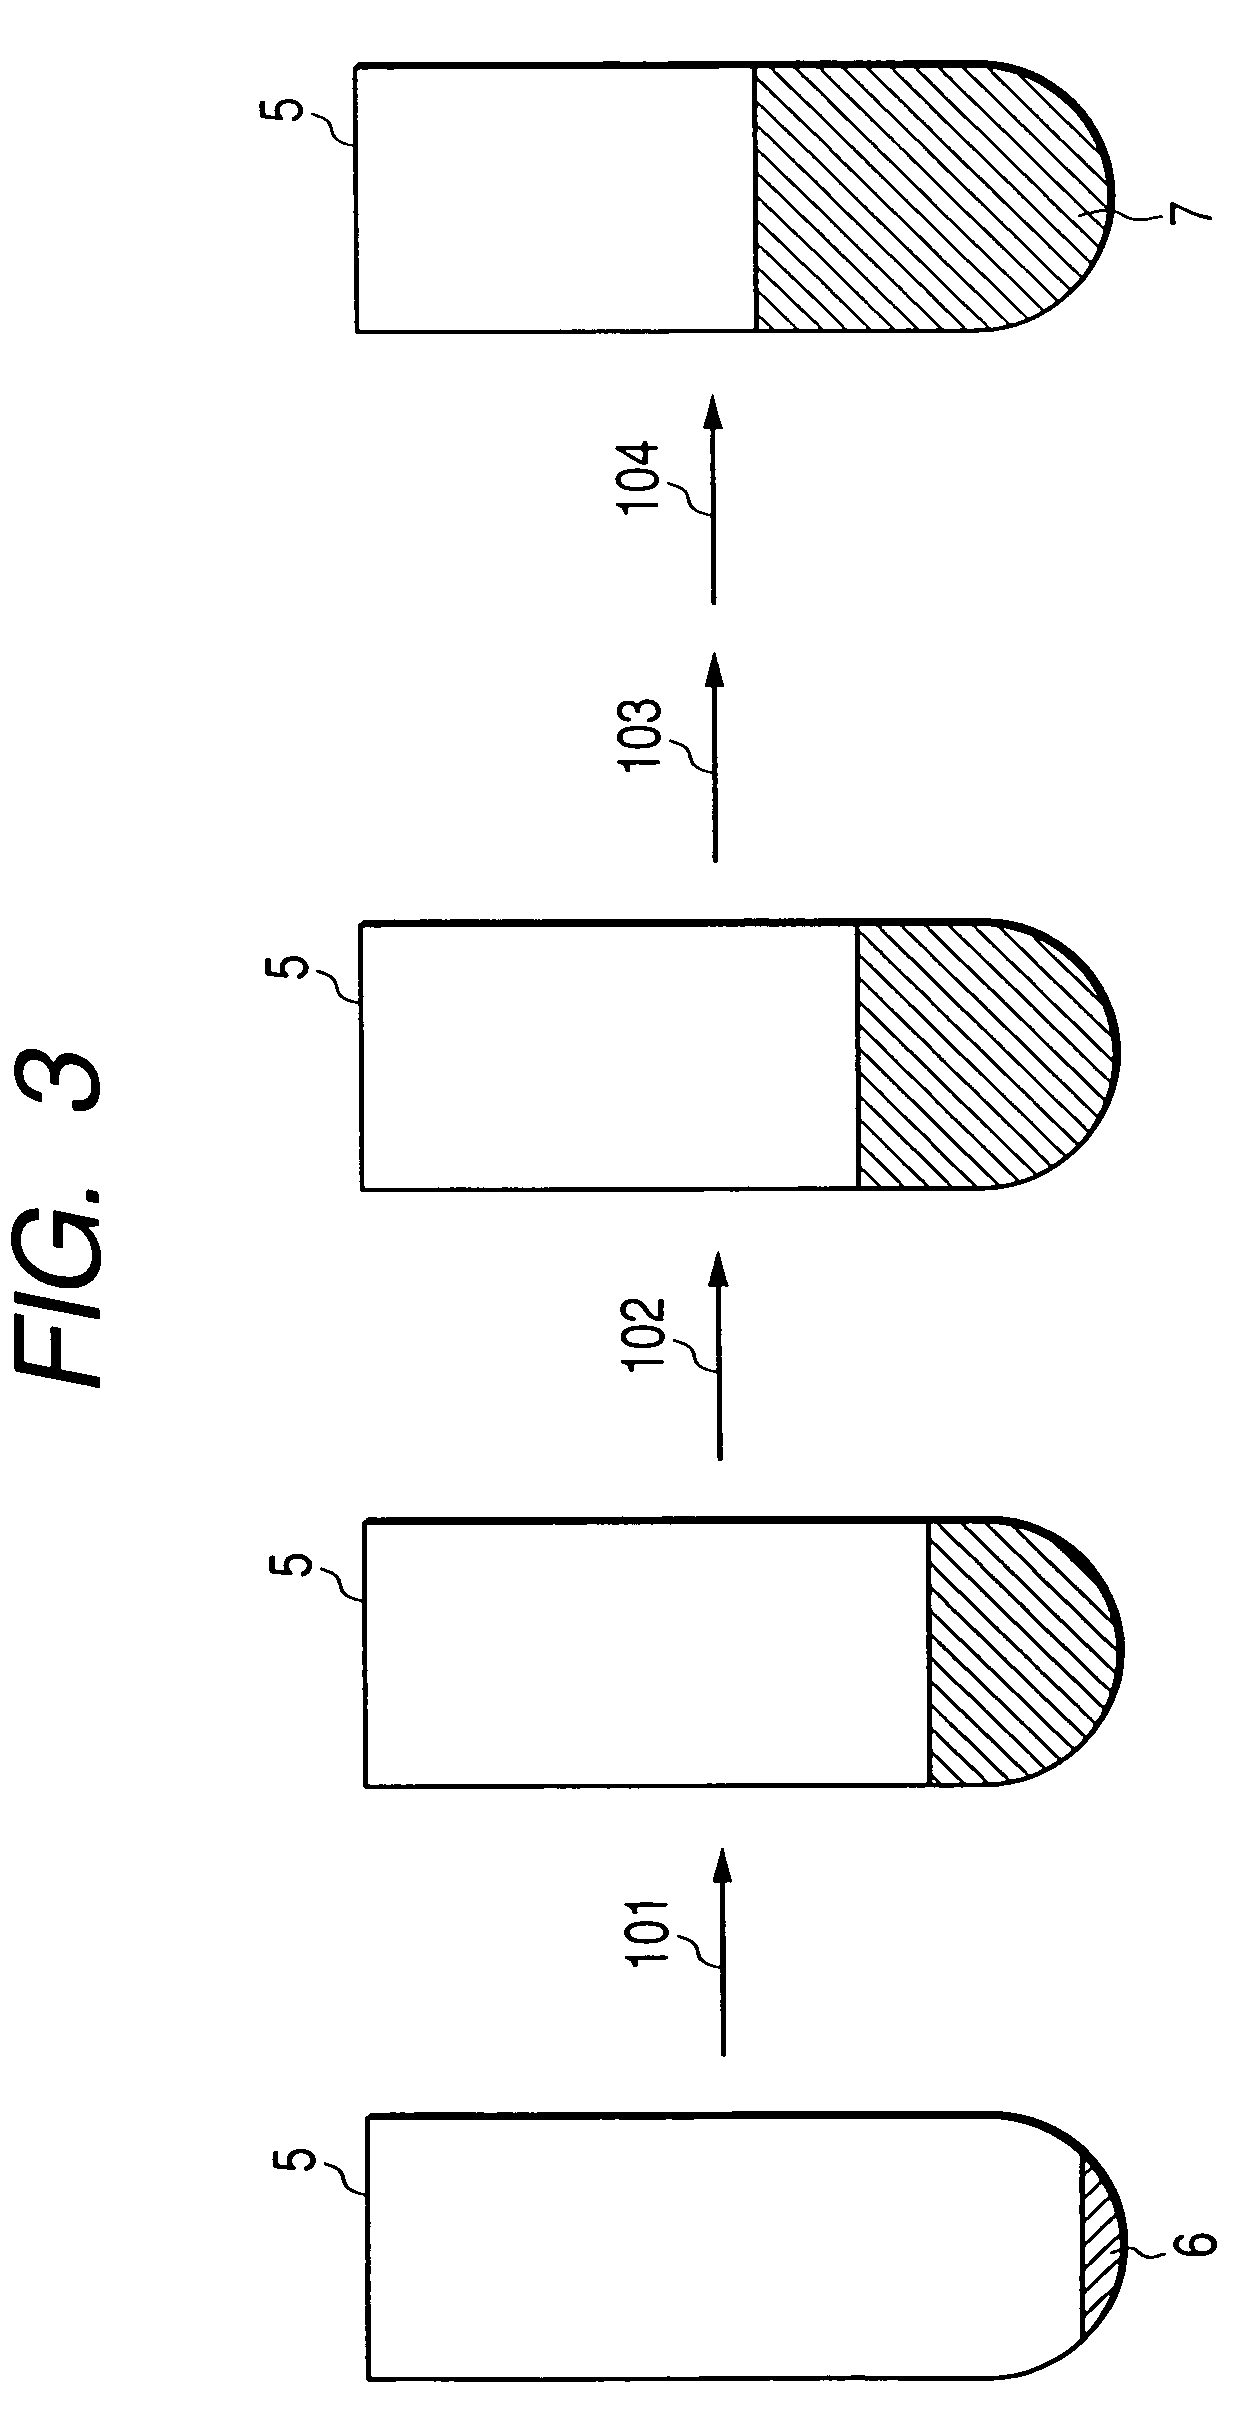 Method for isolating and purifying nucleic acids